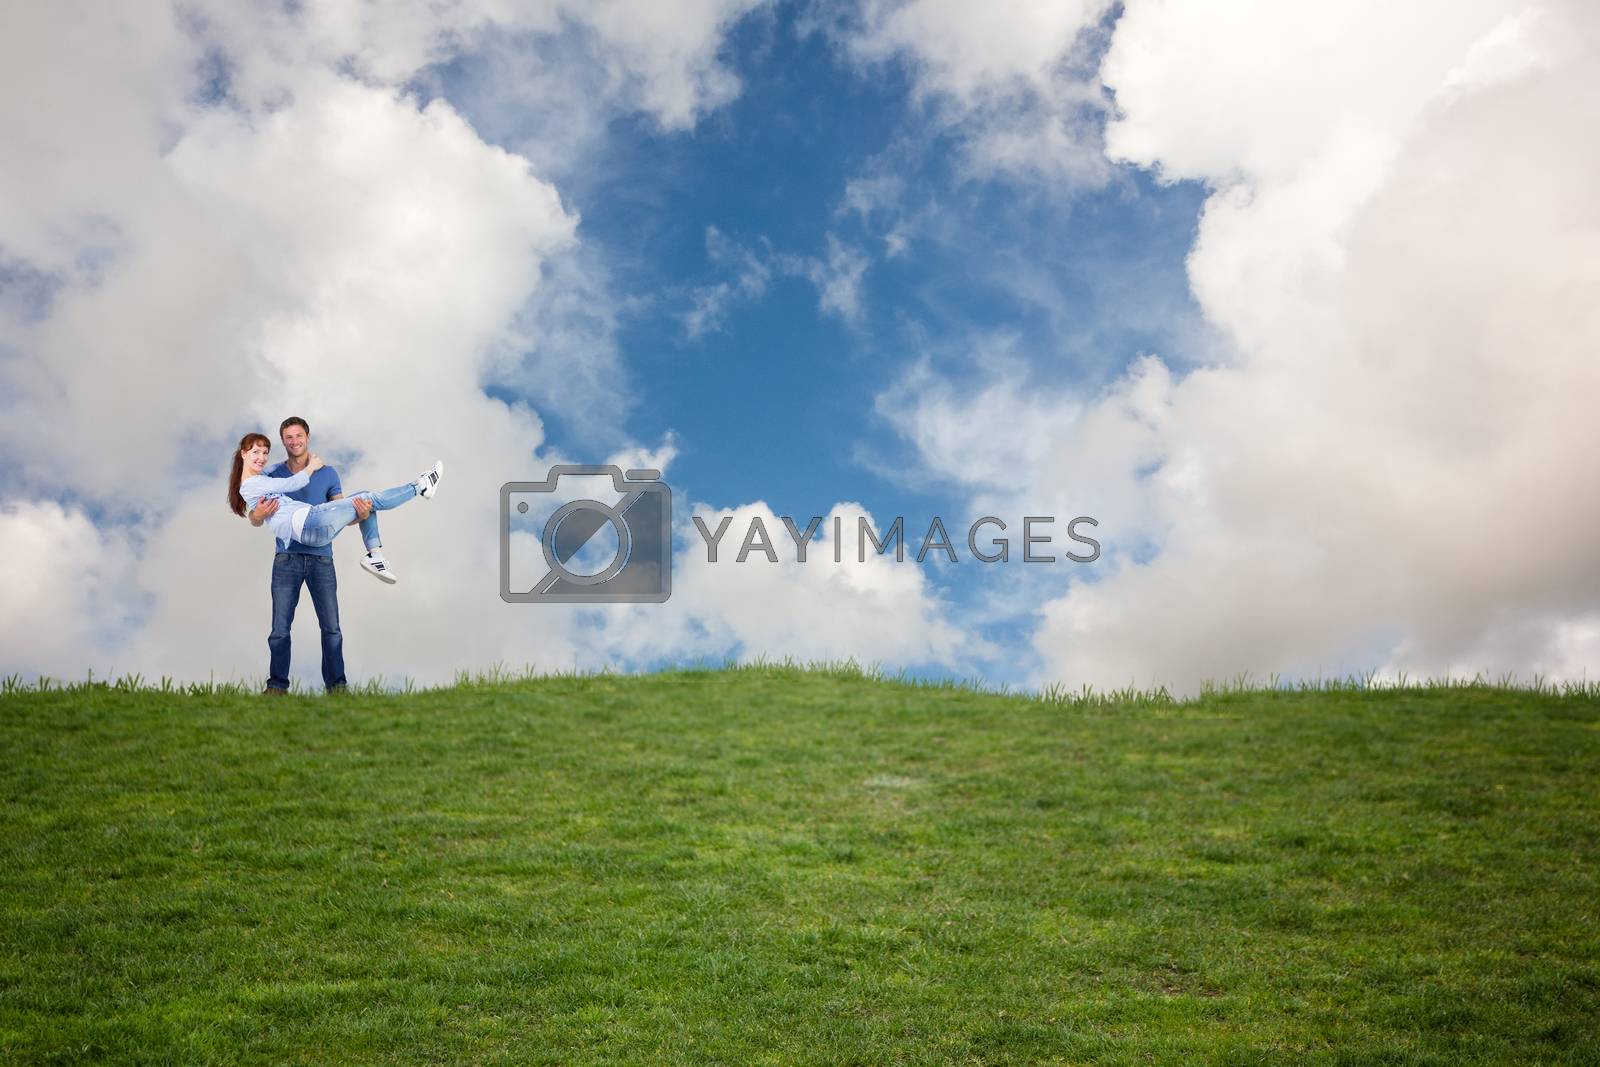 Royalty free image of Composite image of man lifting up his girlfriend by Wavebreakmedia